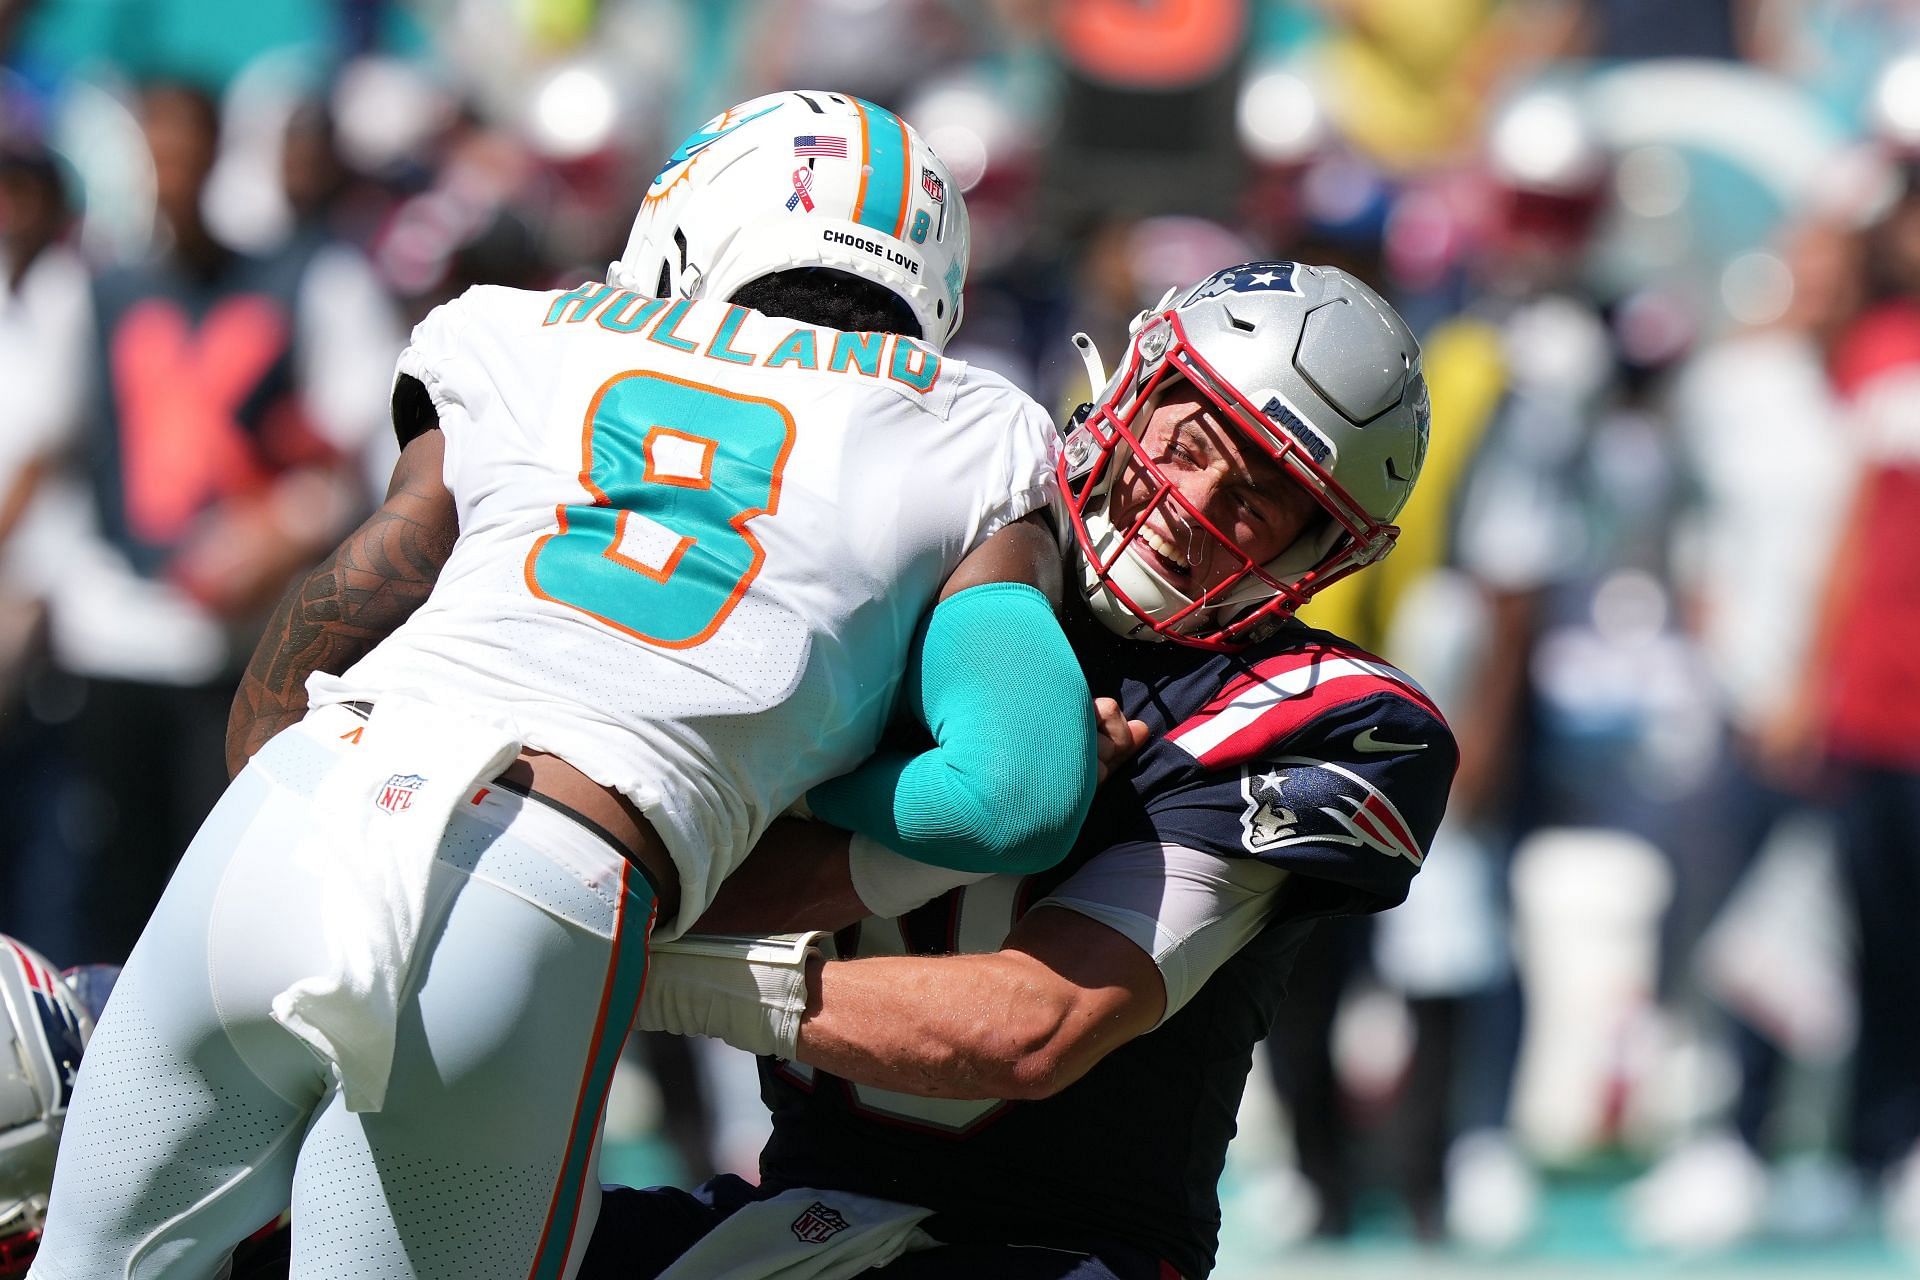 The New England Patriots play the Miami Dolphins